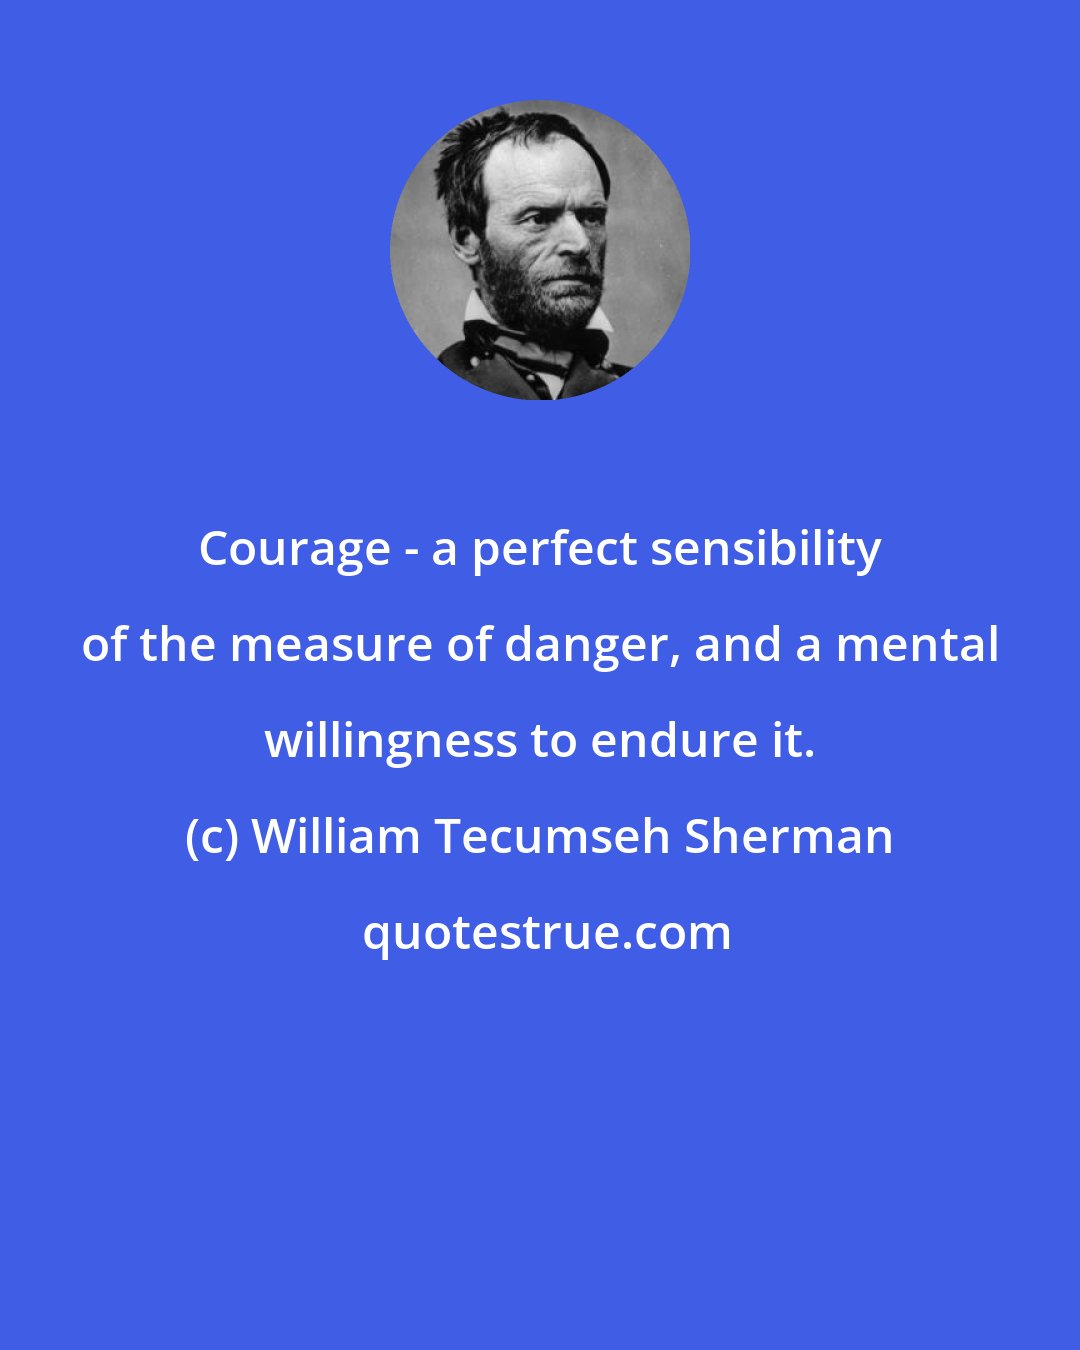 William Tecumseh Sherman: Courage - a perfect sensibility of the measure of danger, and a mental willingness to endure it.